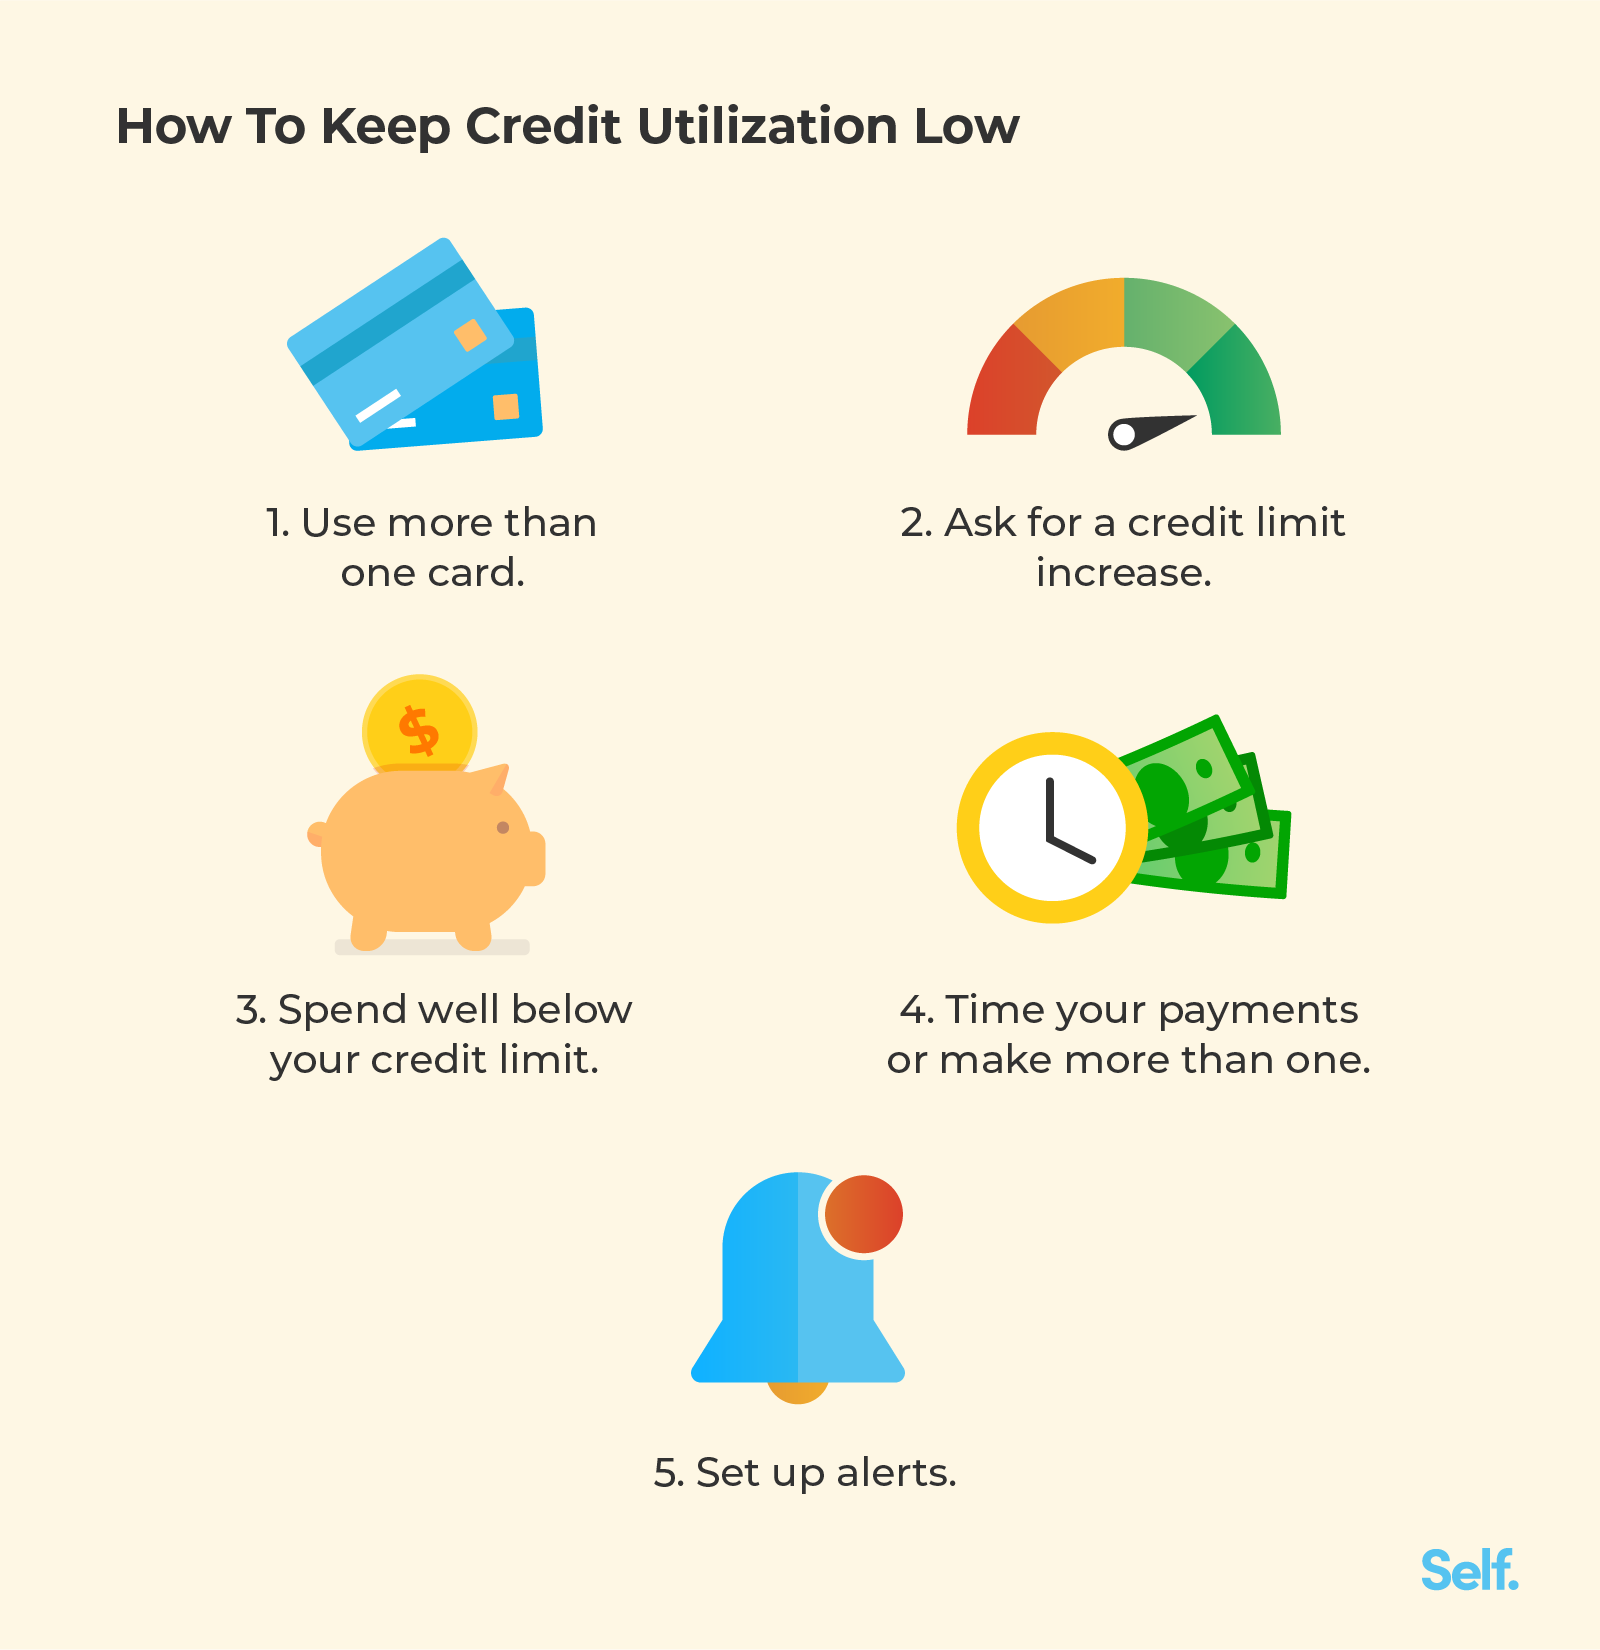 Tips on keeping credit utilization low